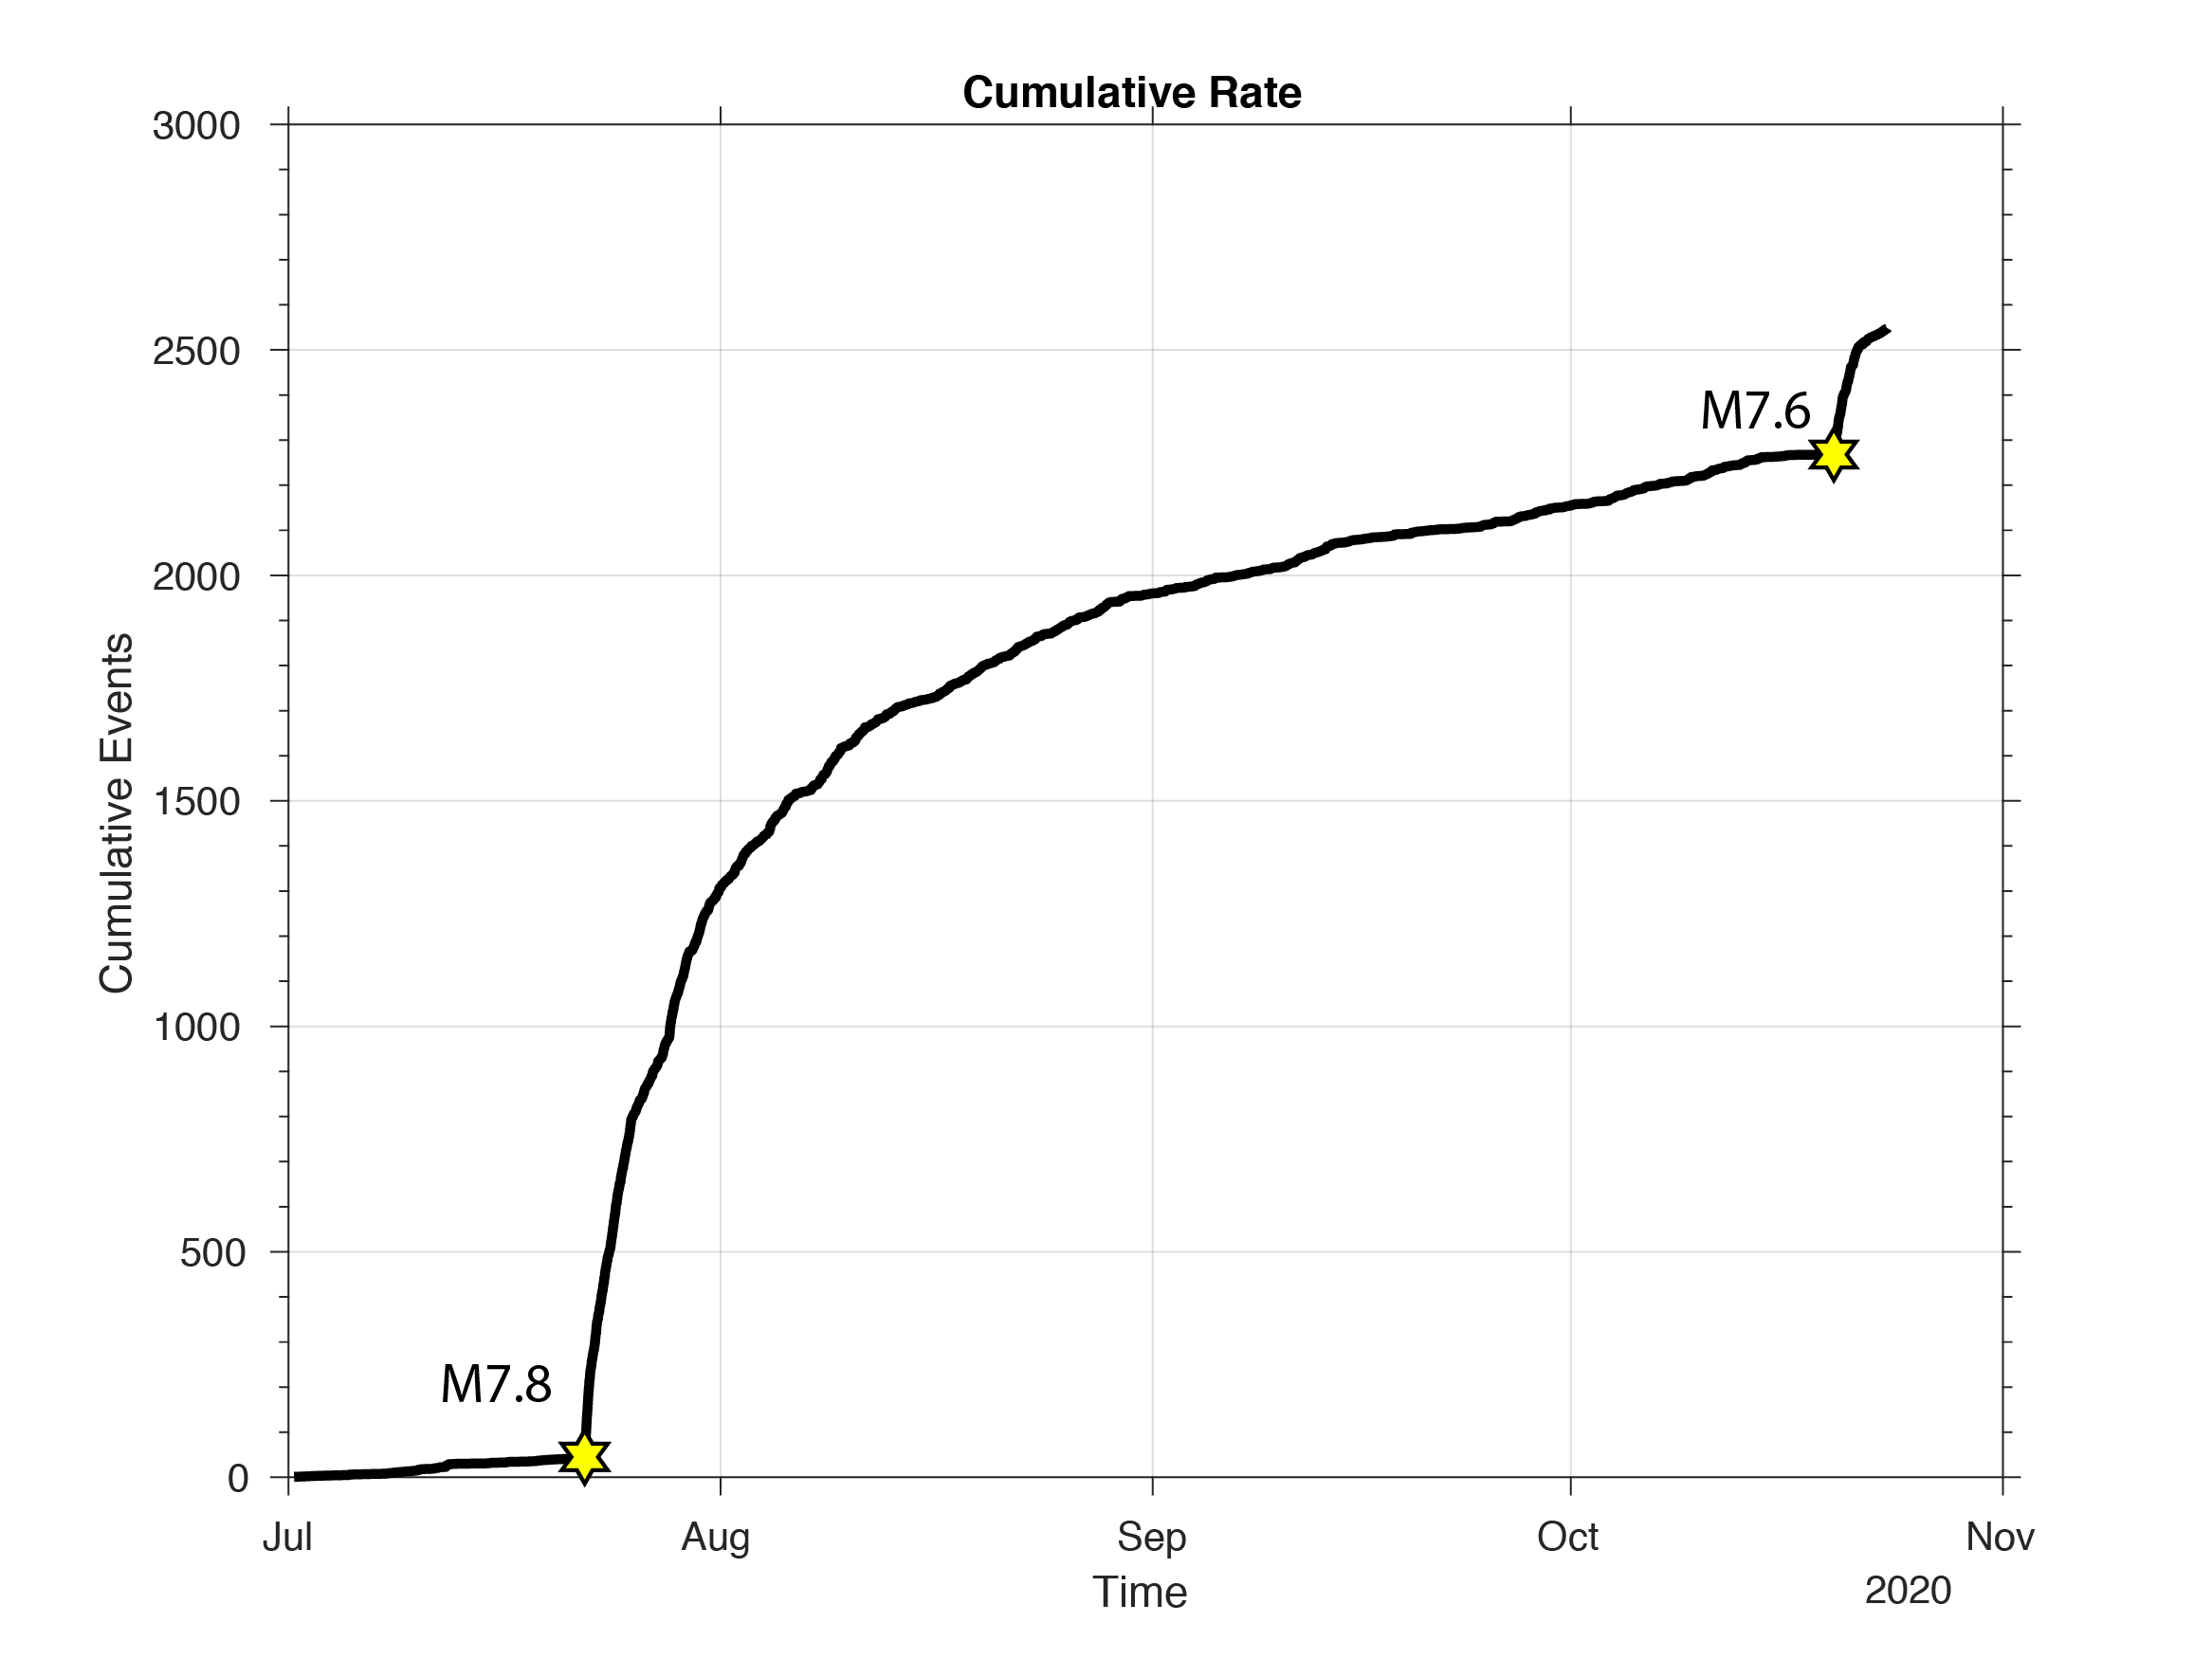 Cumulative number of events recorded within the M7.8 aftershock region between July 1 and October 23, 2020.